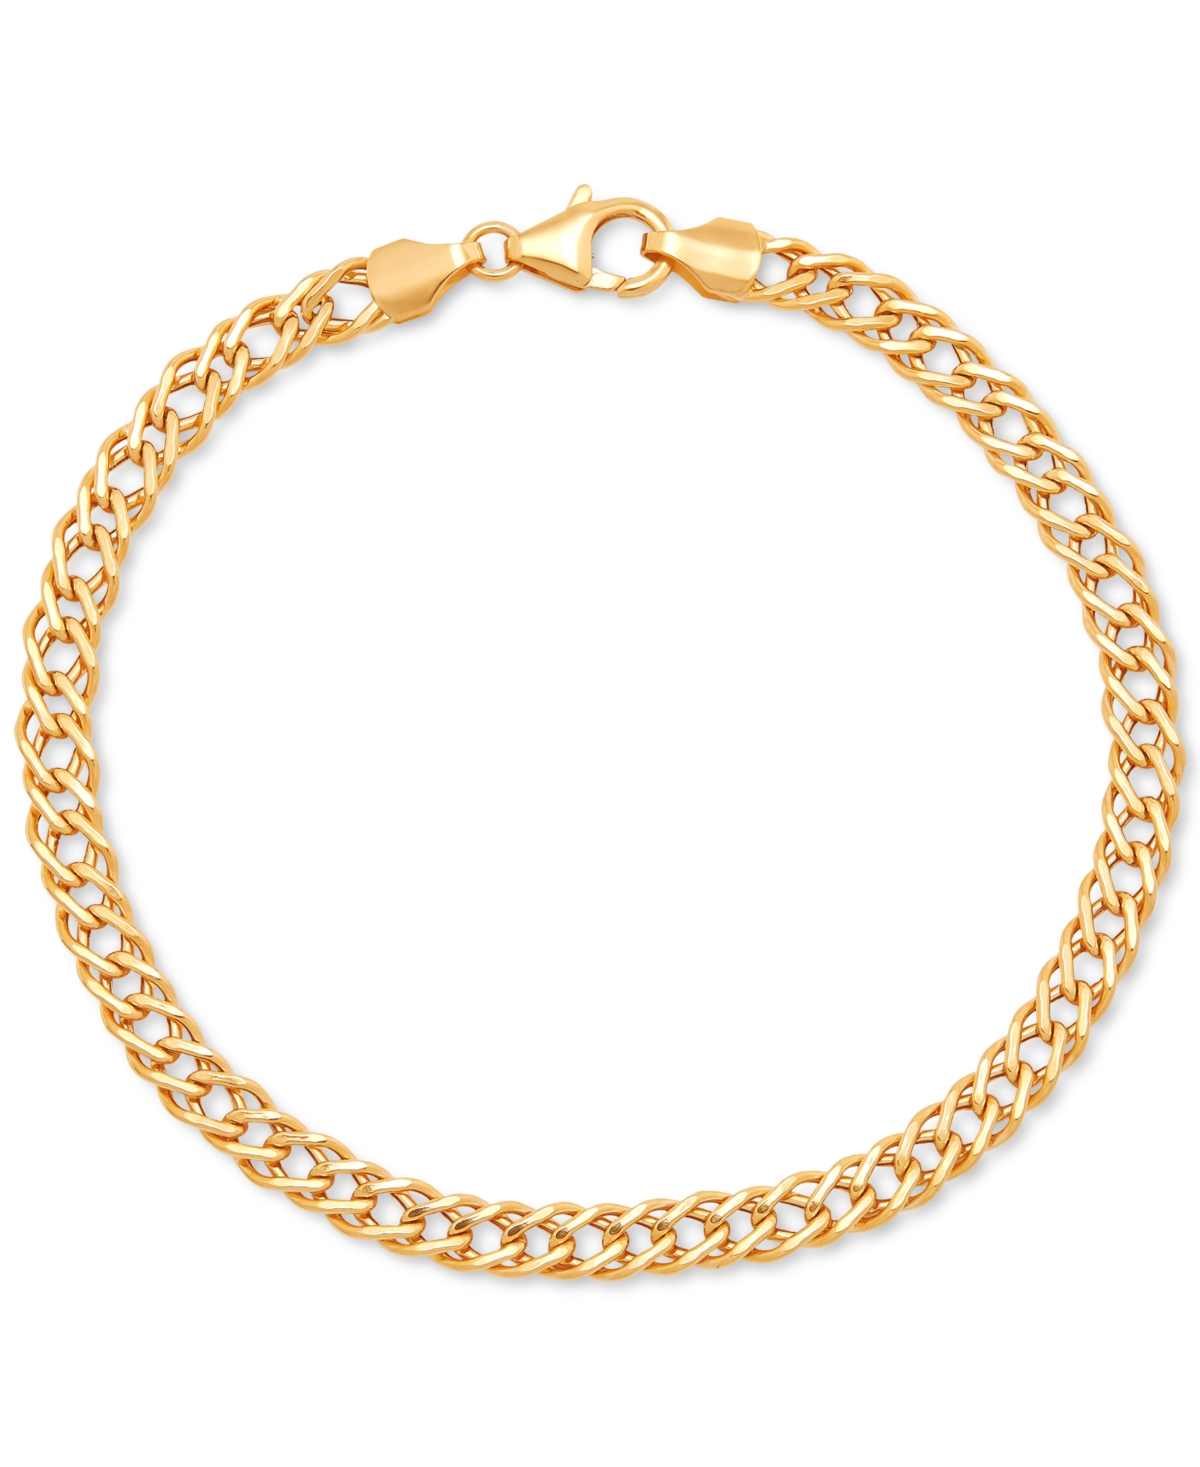 Double Curb Link Chain Bracelet in 10k Gold - Gold